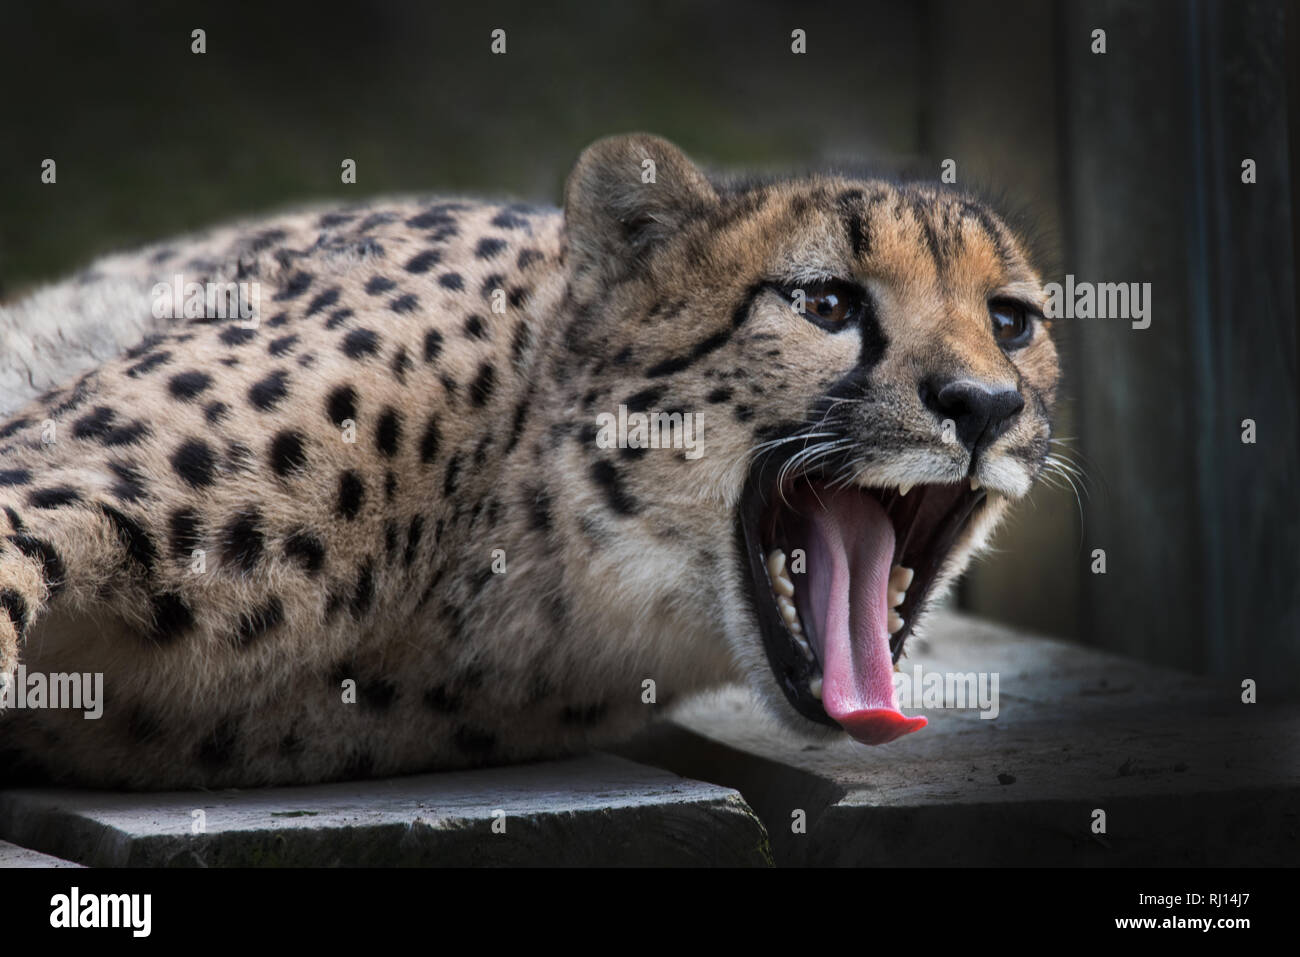 Cheetah showing off aggression Stock Photo